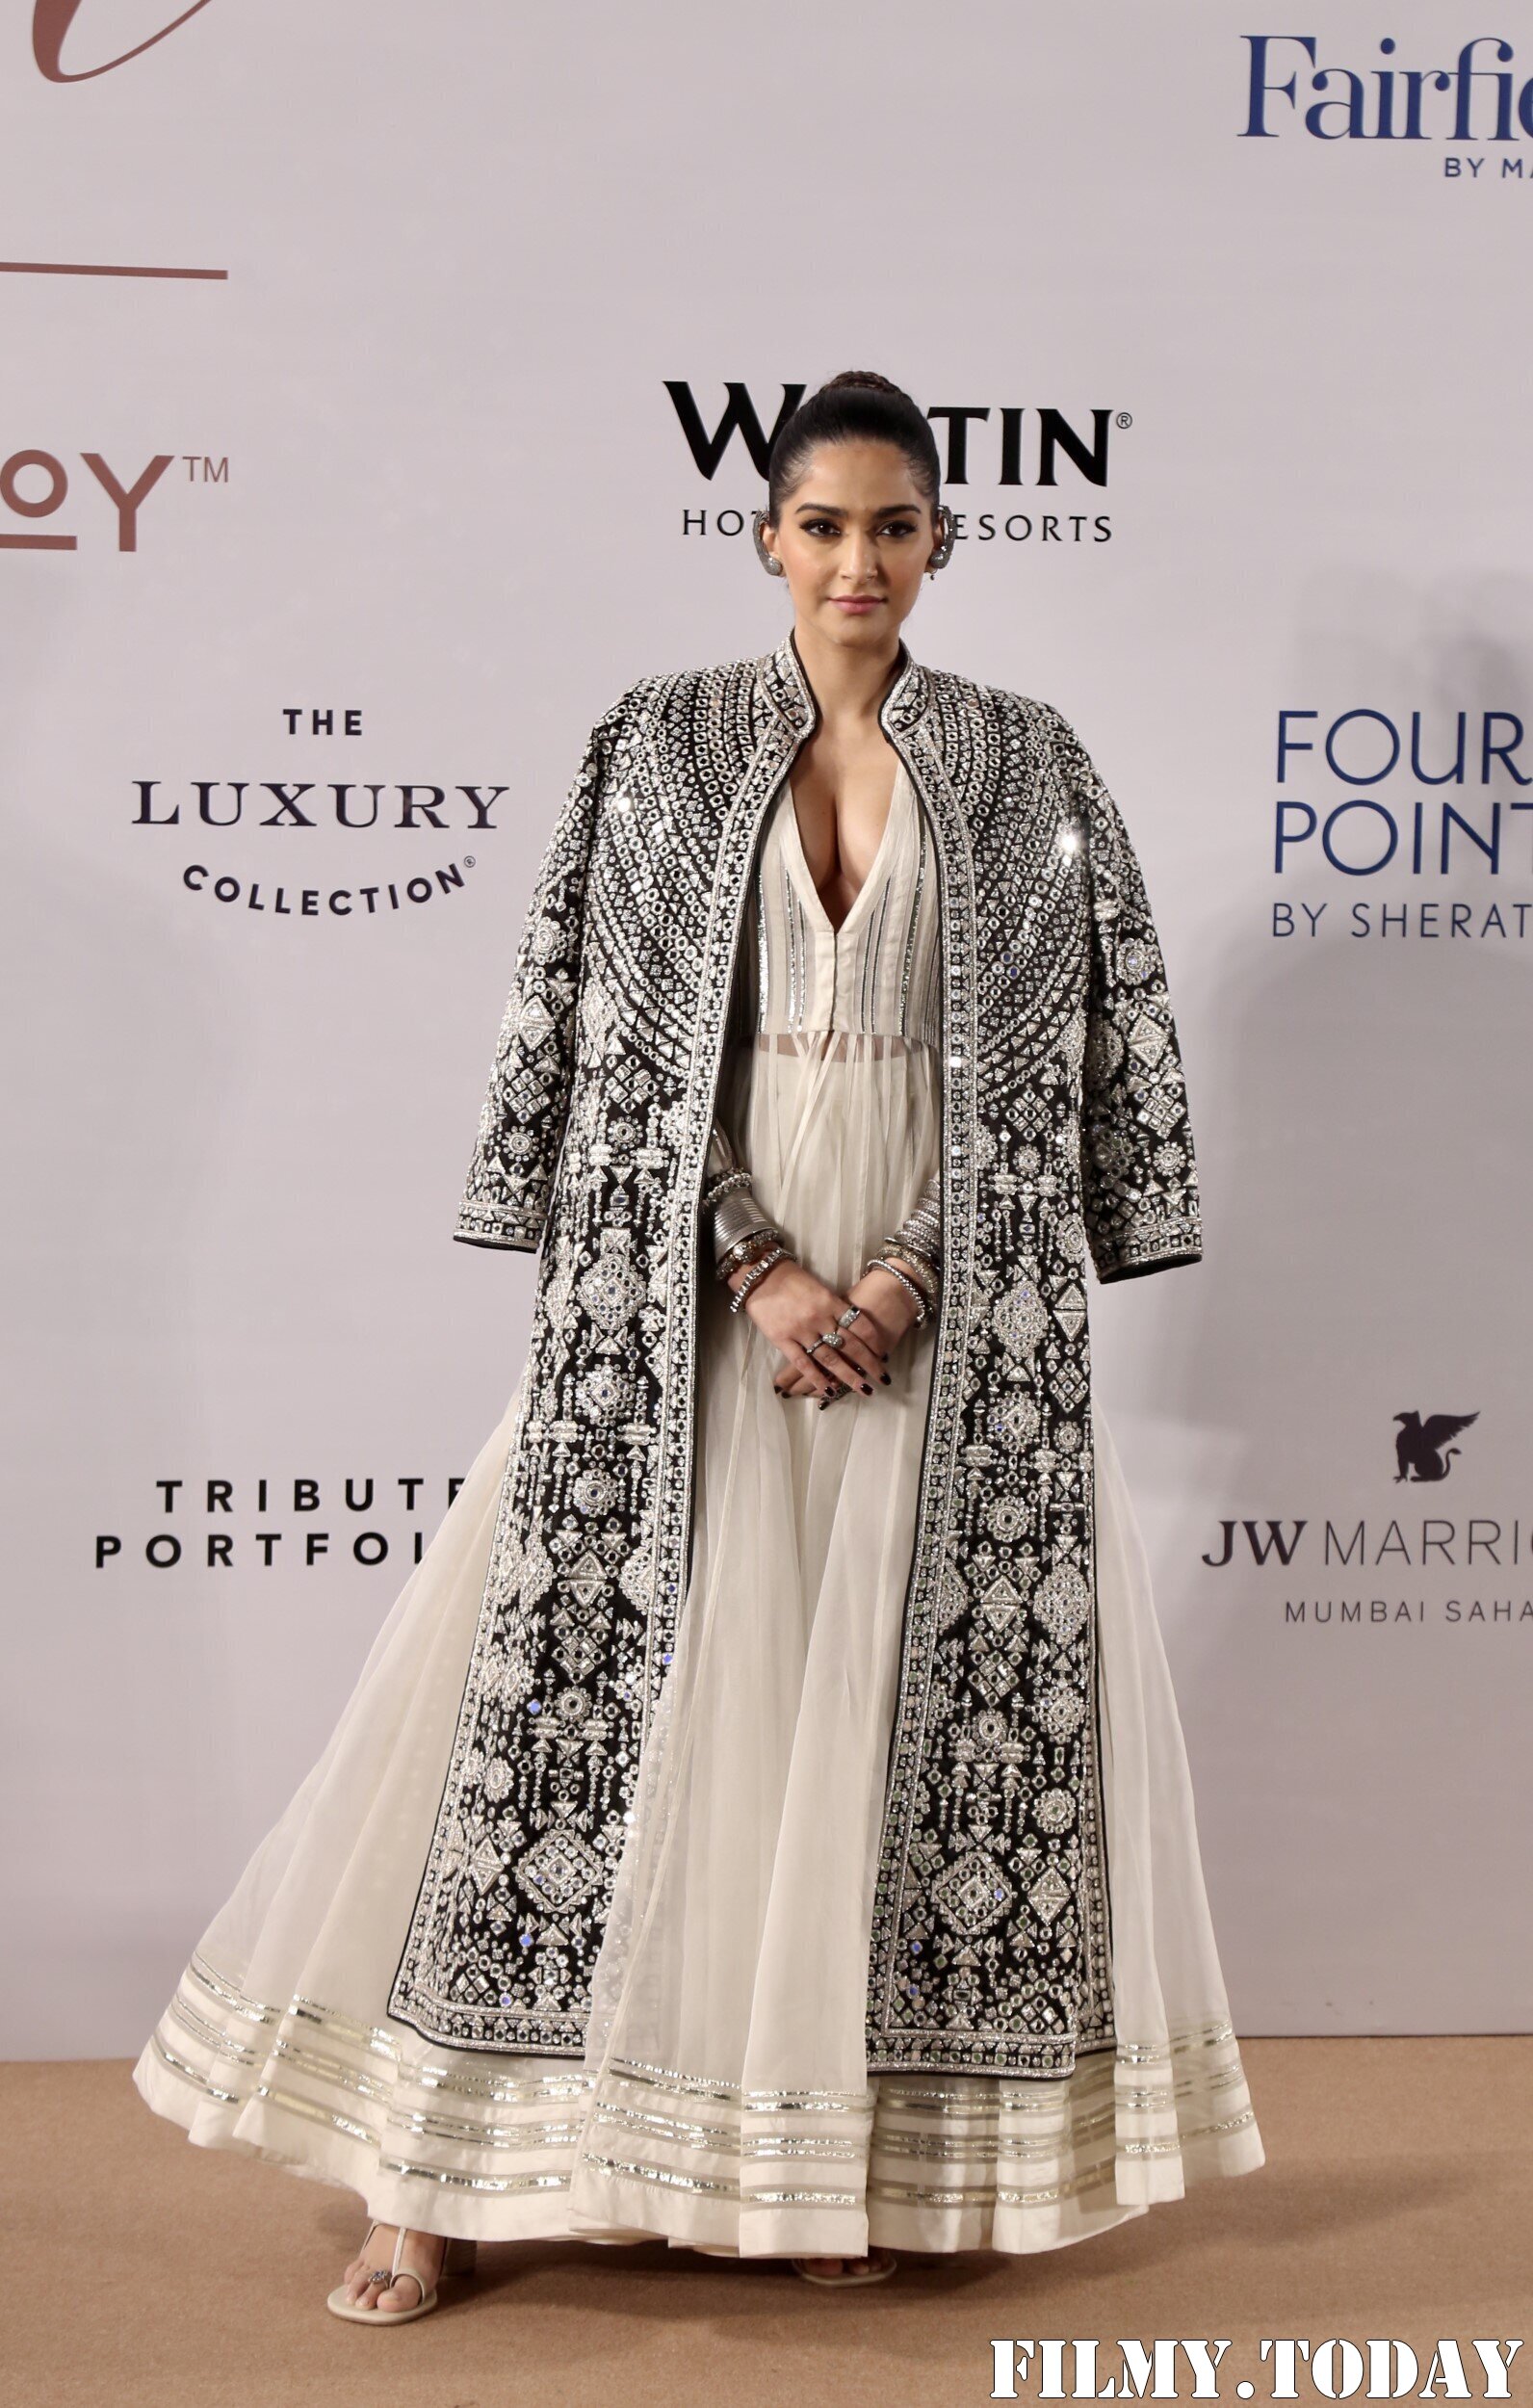 Sonam Kapoor Ahuja - Photos: Celebs At The Shaadi By Marriott Bonvoy Event | Picture 1922396